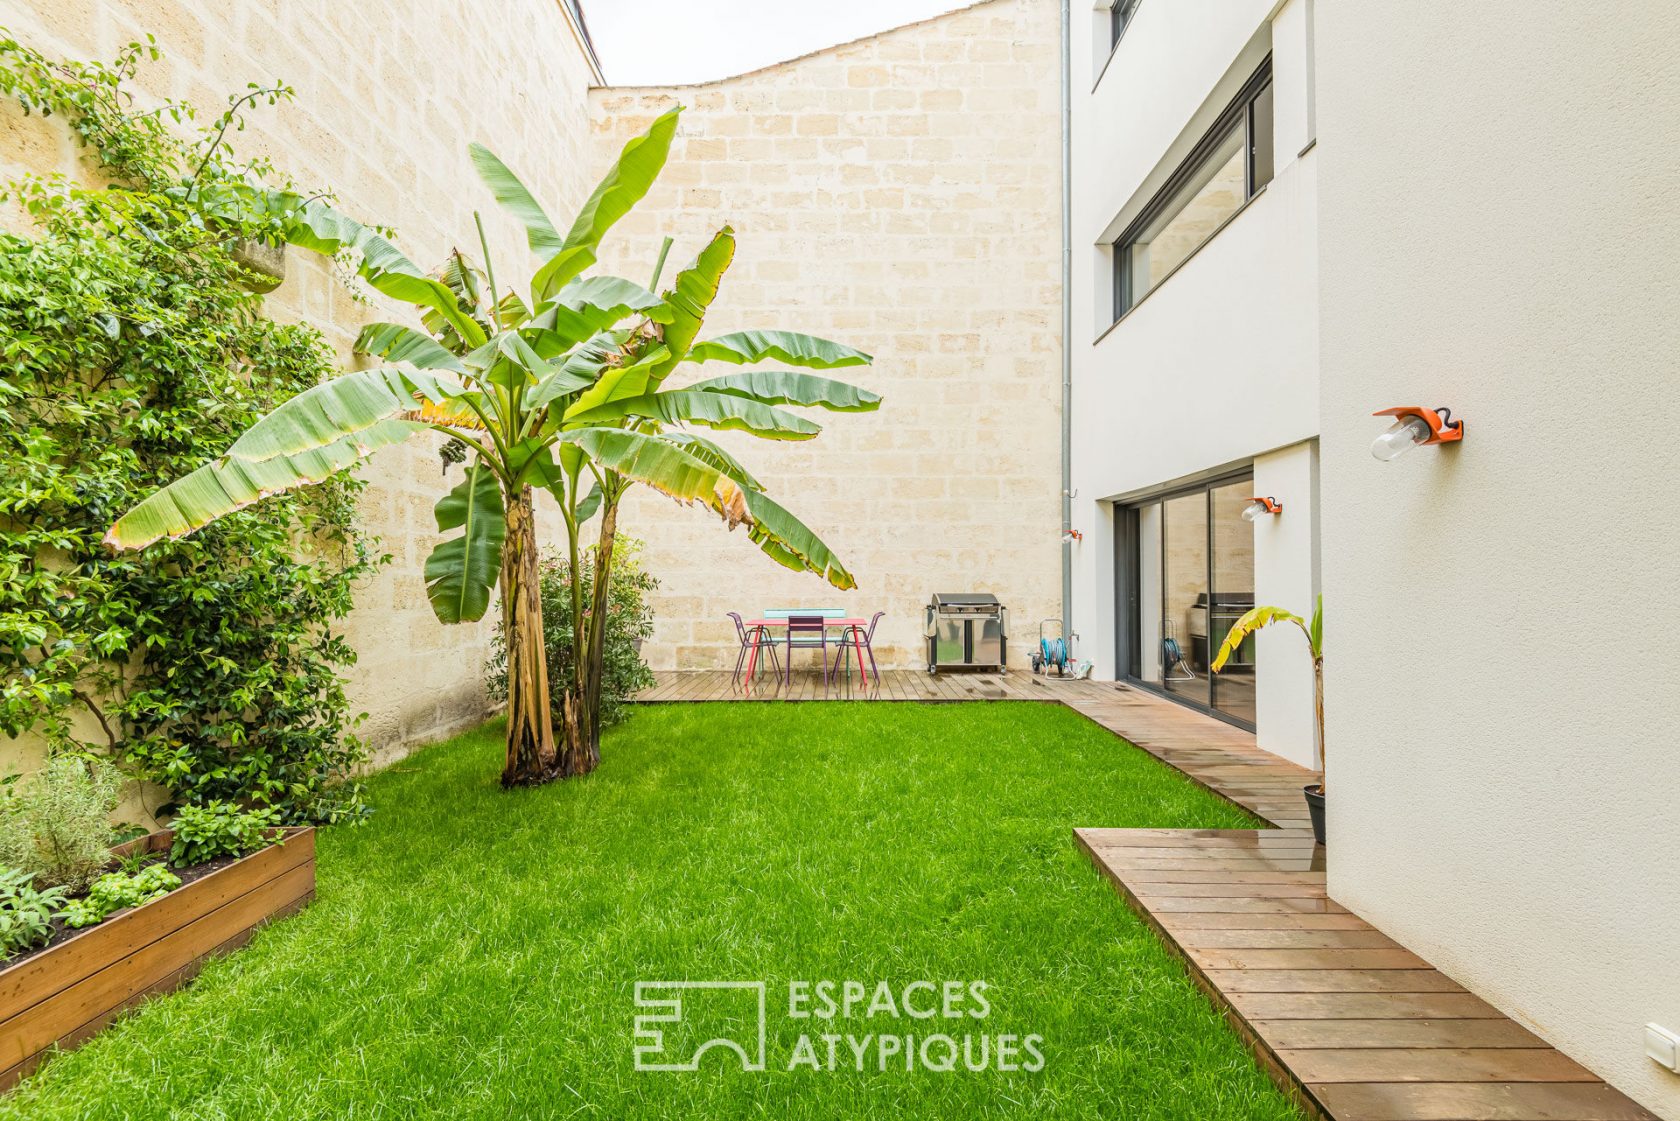 The contemporary triplex with garden in Chartrons